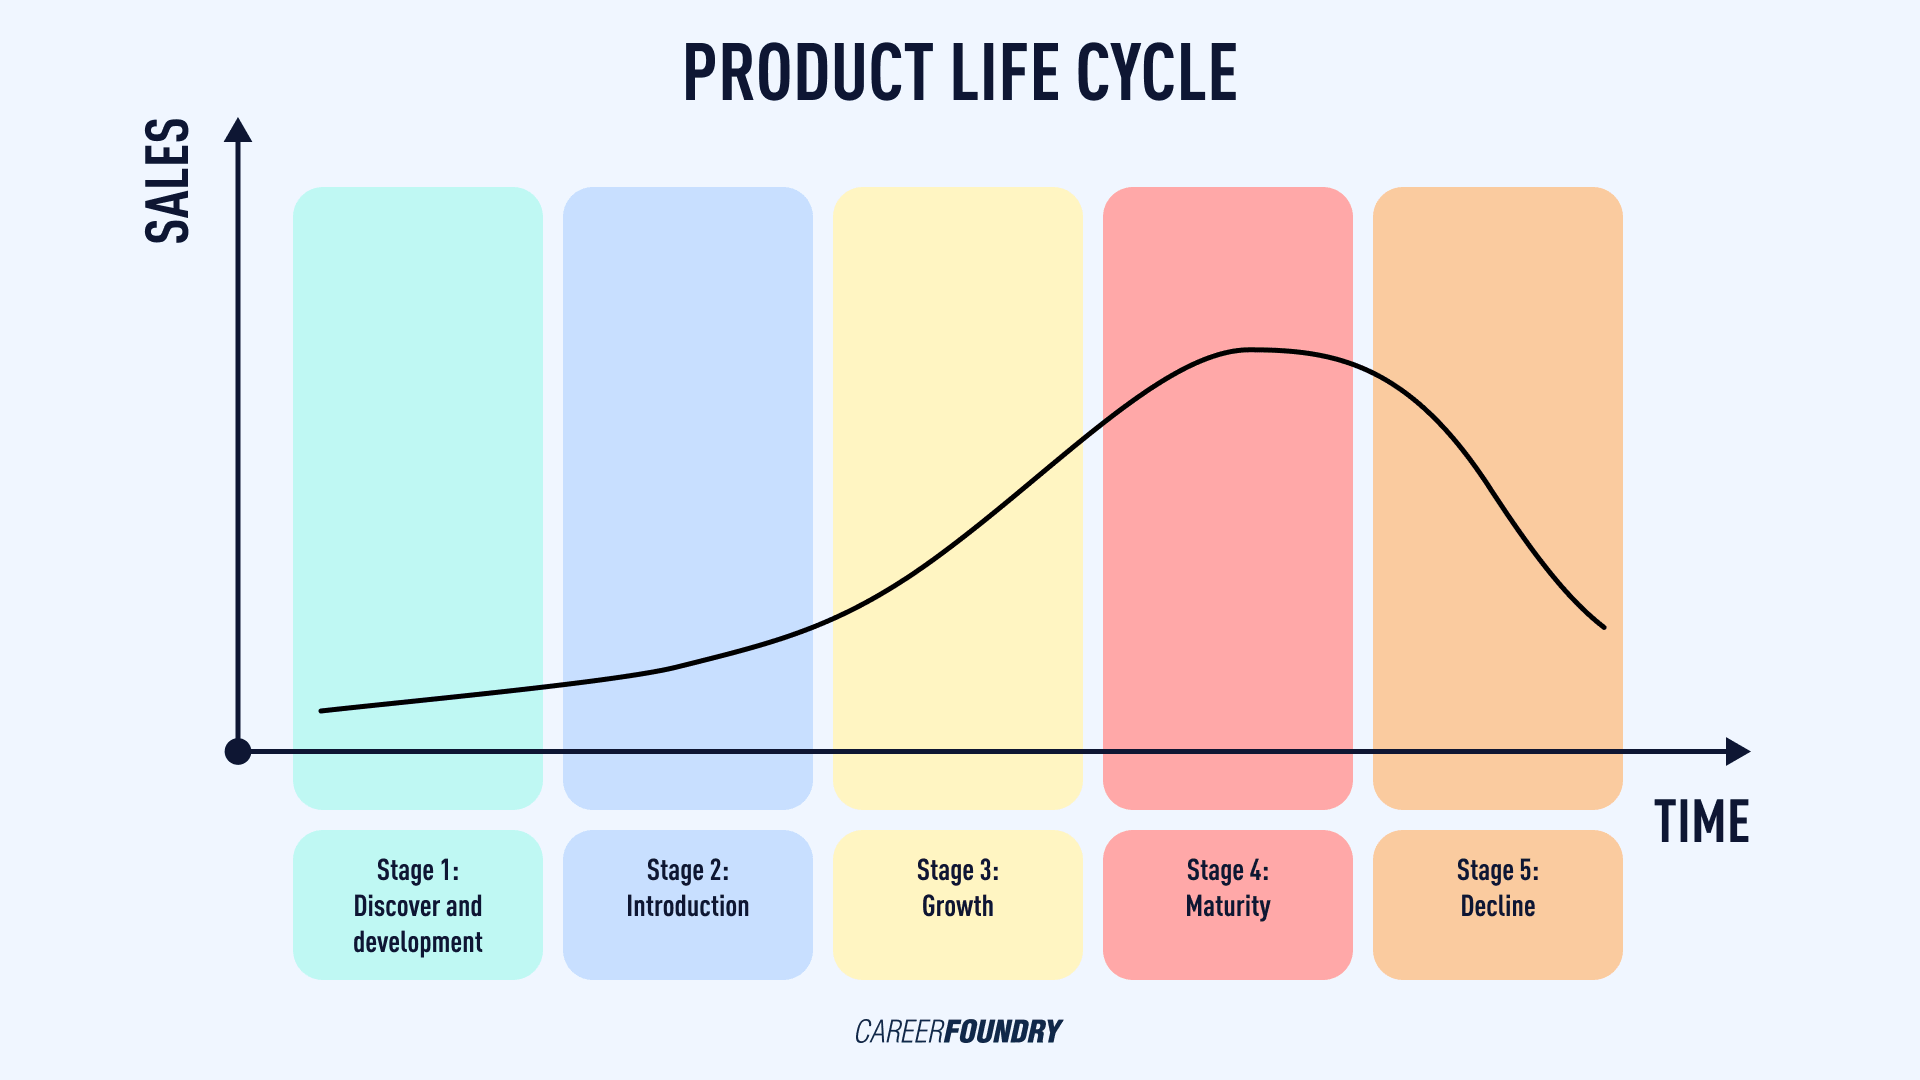 Graphic showing the 5 stages of the product life cycle.